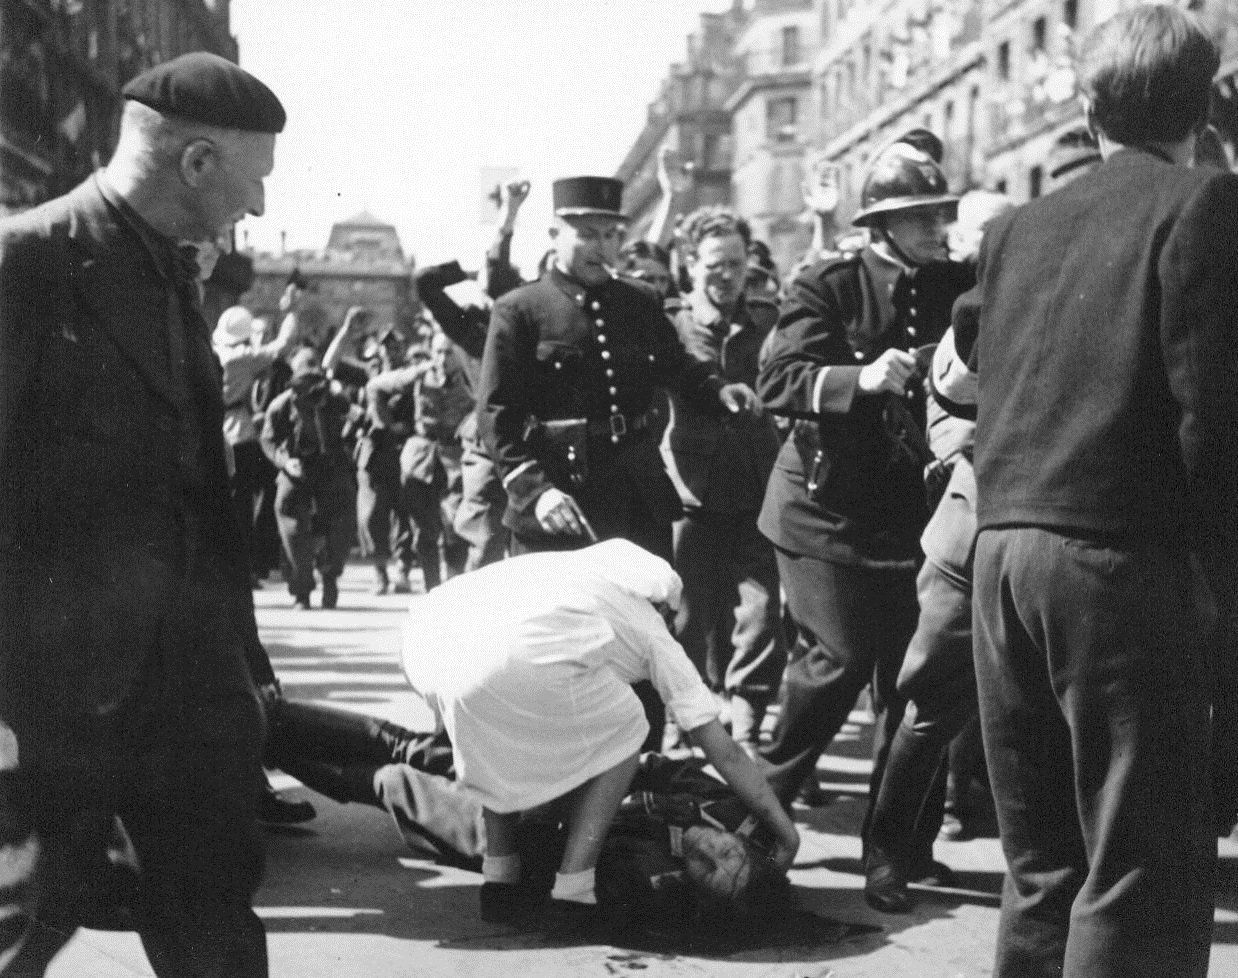 Resistance Roundup, 8/28/1944. Paris -- Lying wounded in the street, a German Officer gets the attention of a Red Cross worker as French patriots round up Nazis and collaborators  after street fighting in liberated Paris. Resistance snipers still terrorize the populace of the French capital. The allies have left the job of restoring order in Paris to the French. 8/28/44 (ACME);